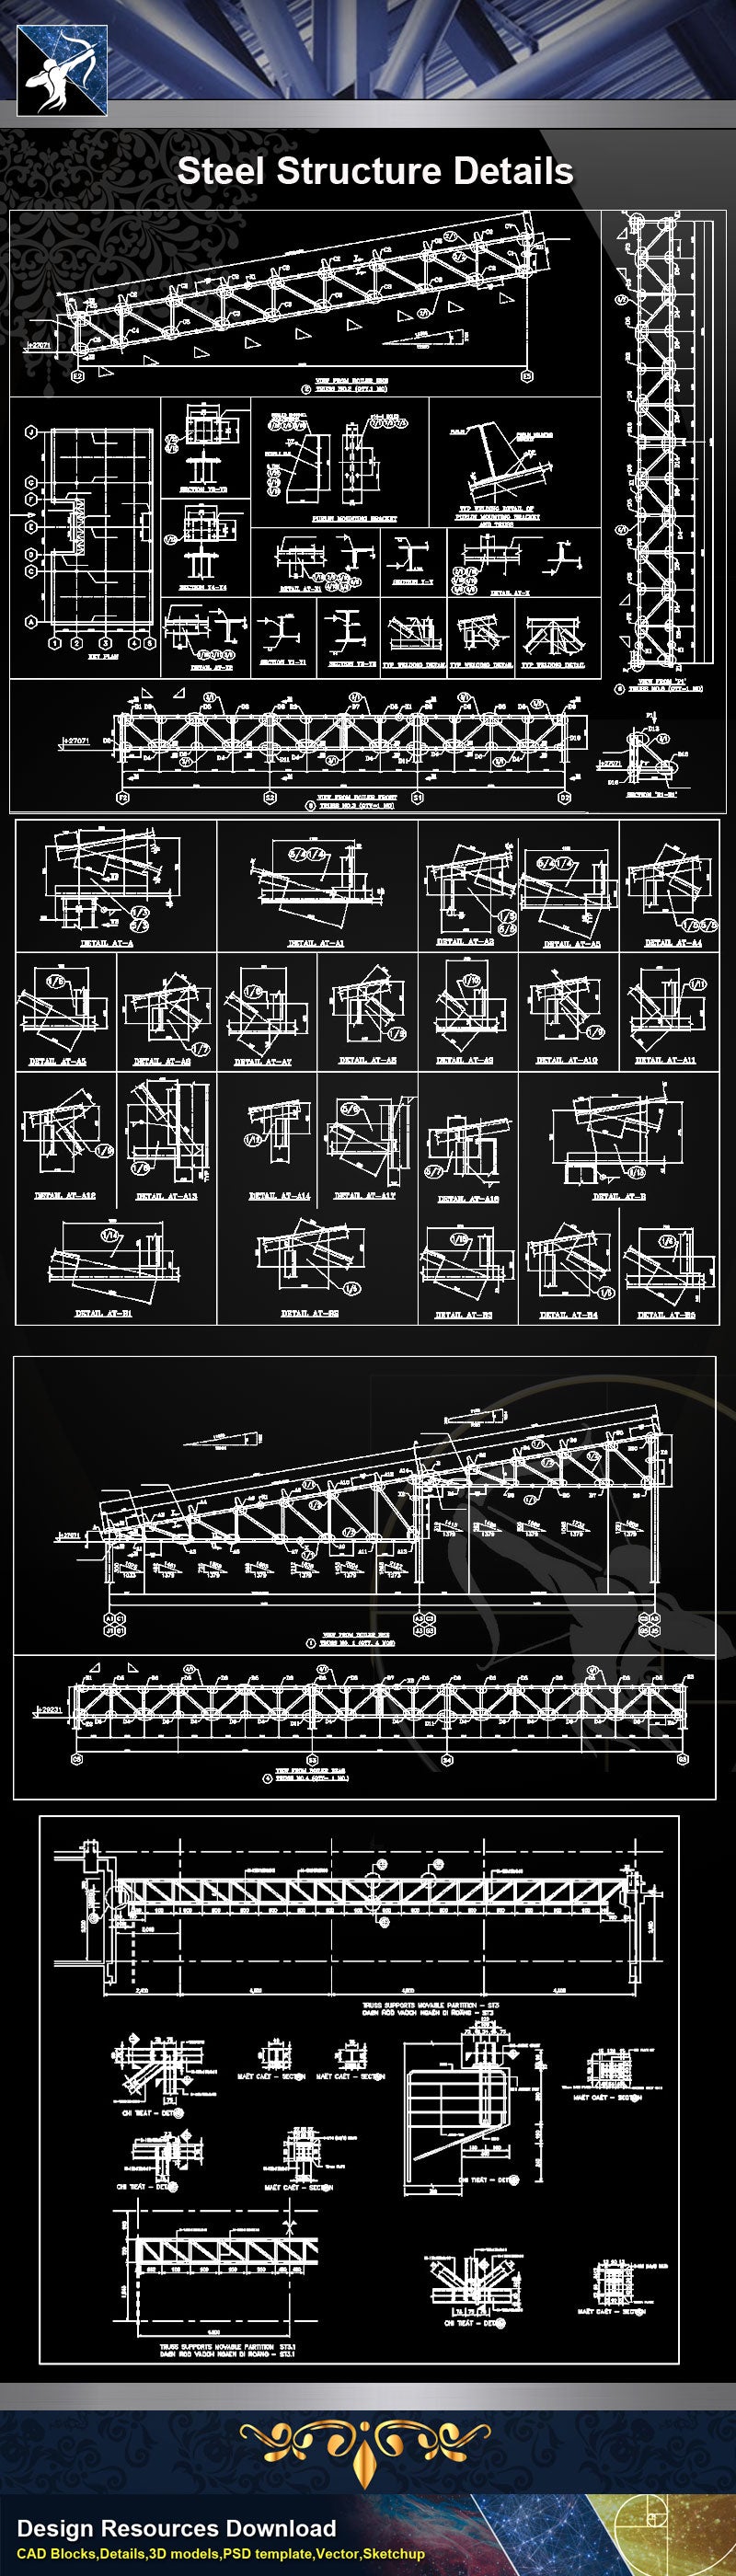 【Steel Structure Details】Steel Structure Details Collection V.9